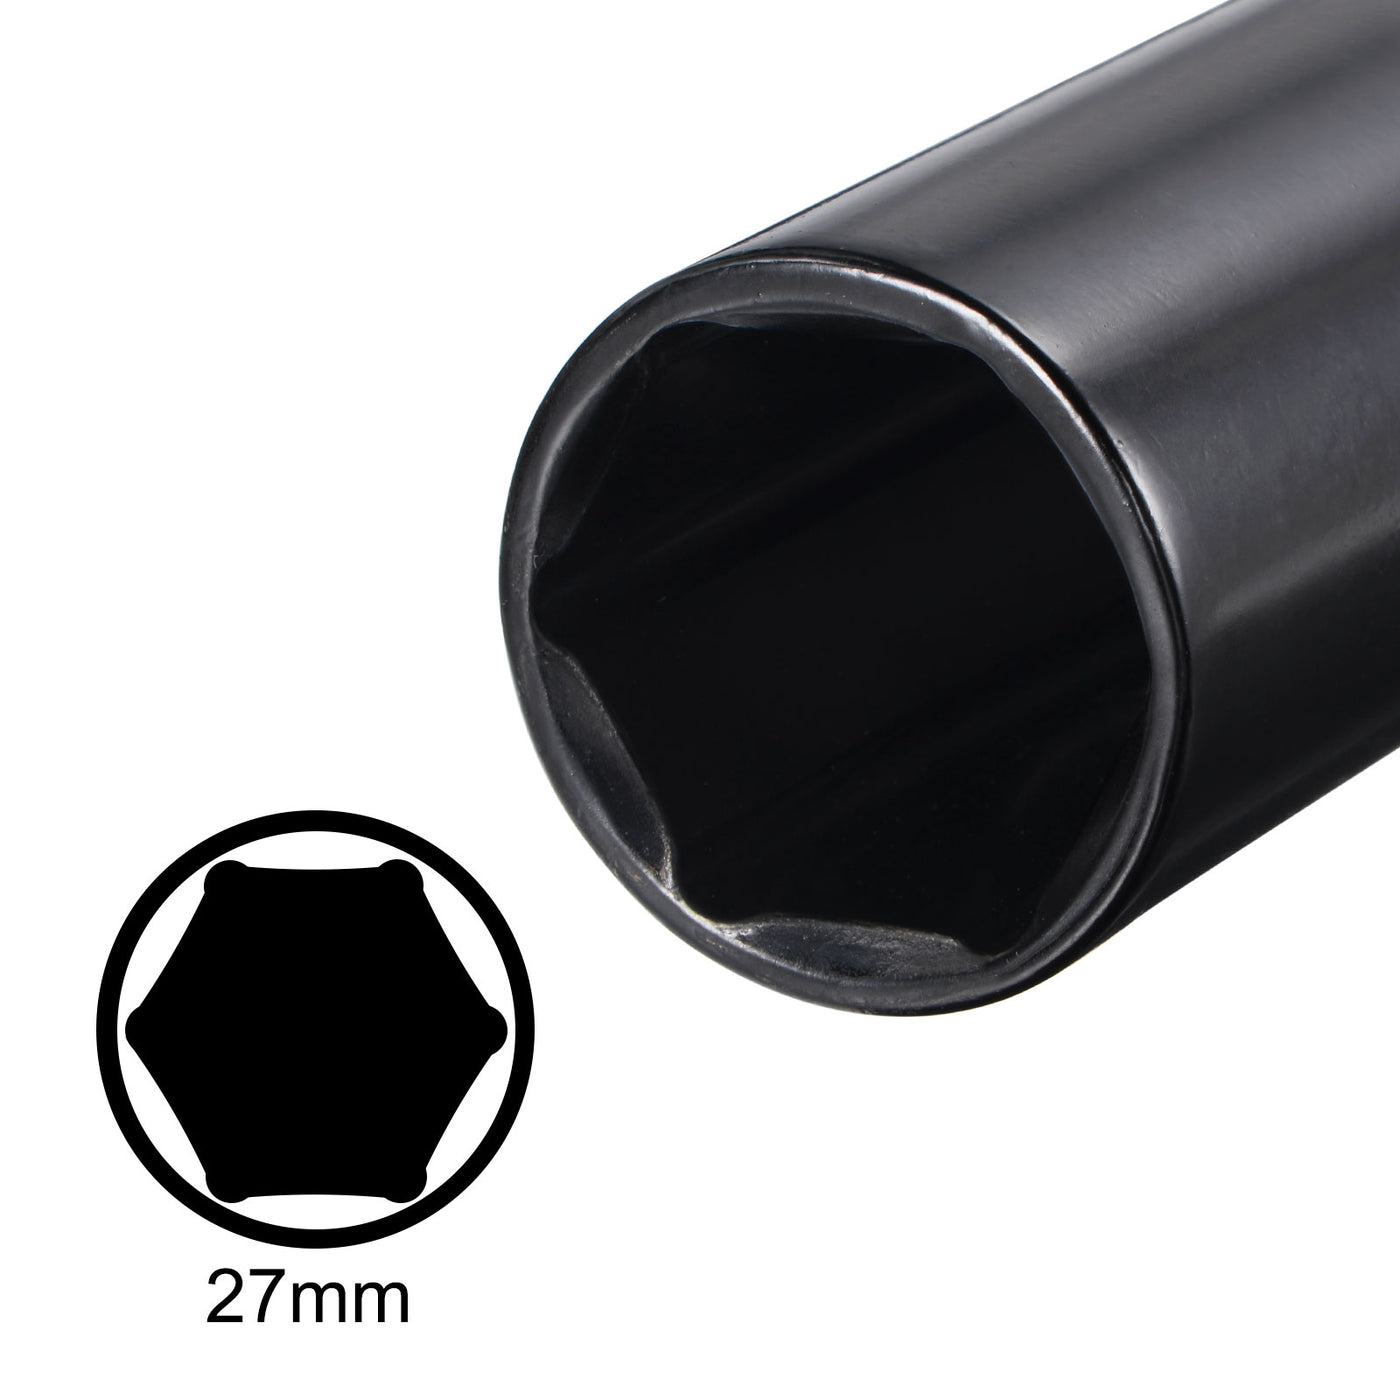 uxcell Uxcell Square Drive x Deep Impact Socket, CR-V 6-Point Metric Sizes